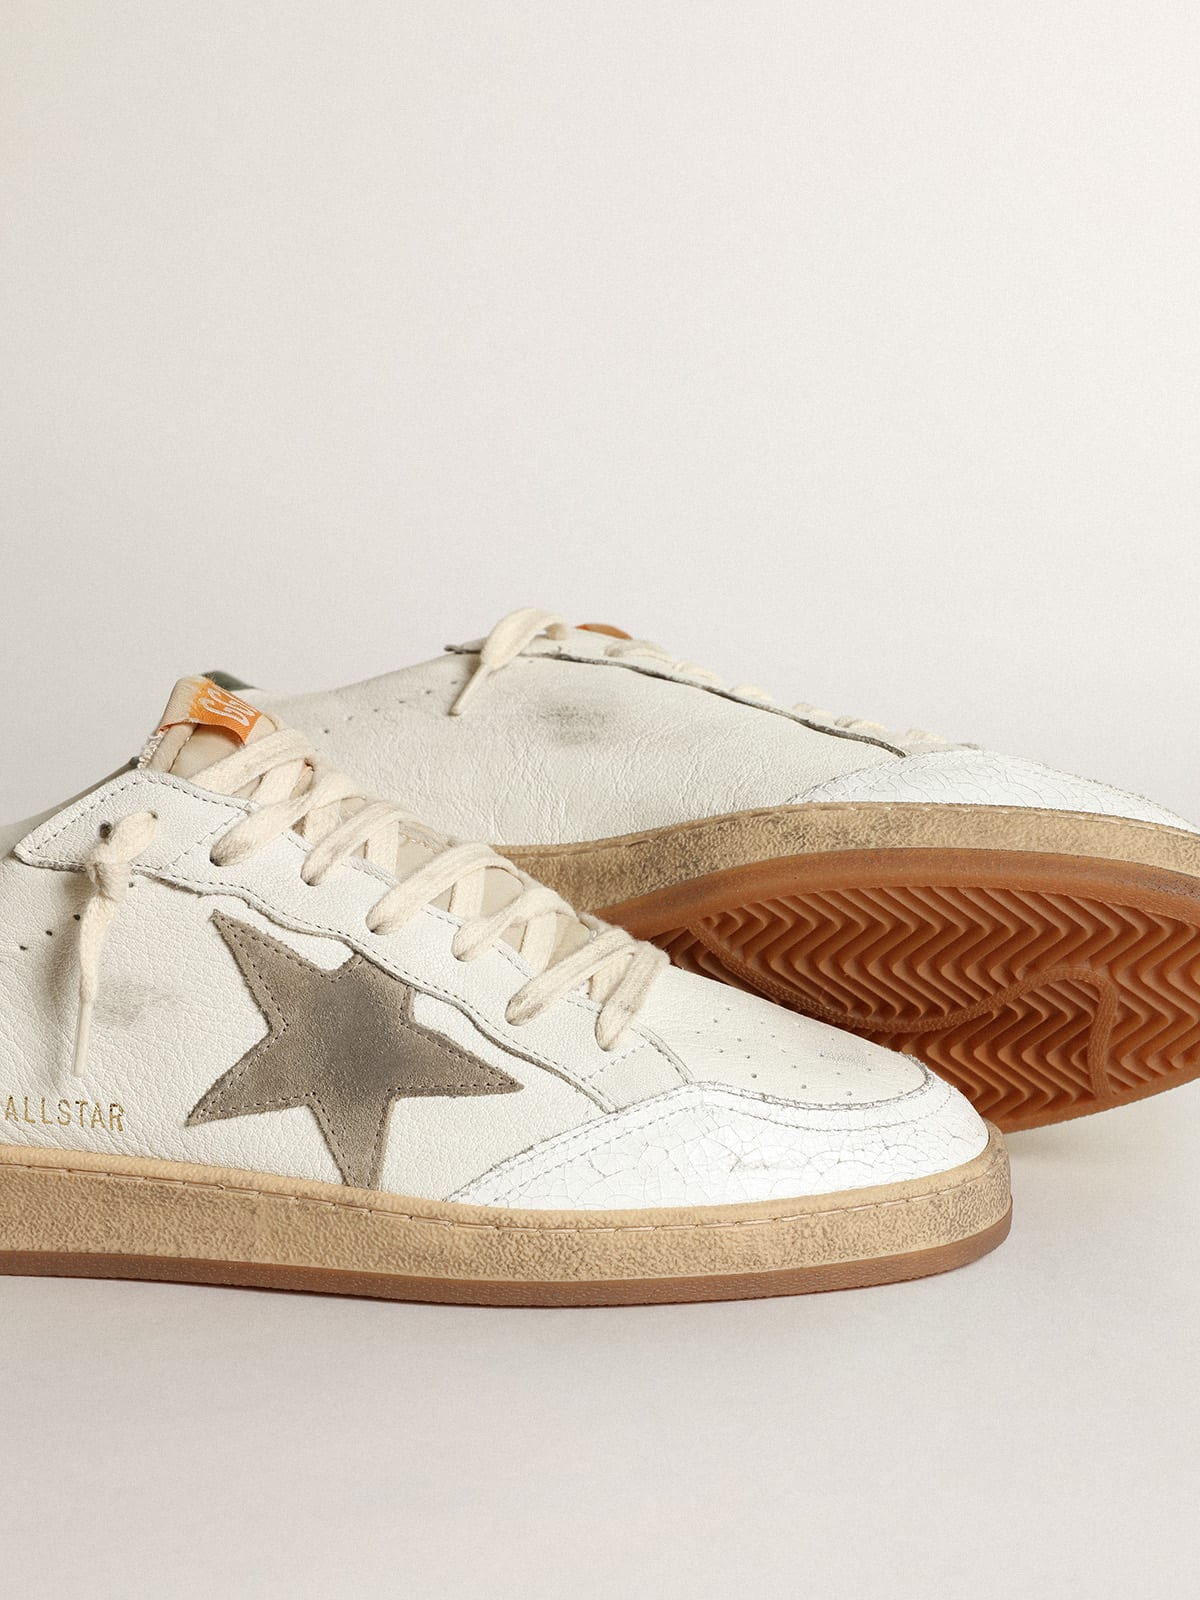 Golden Goose - Ball Star sneakers in white nappa leather with dove-gray suede star and dark green leather heel tab in 